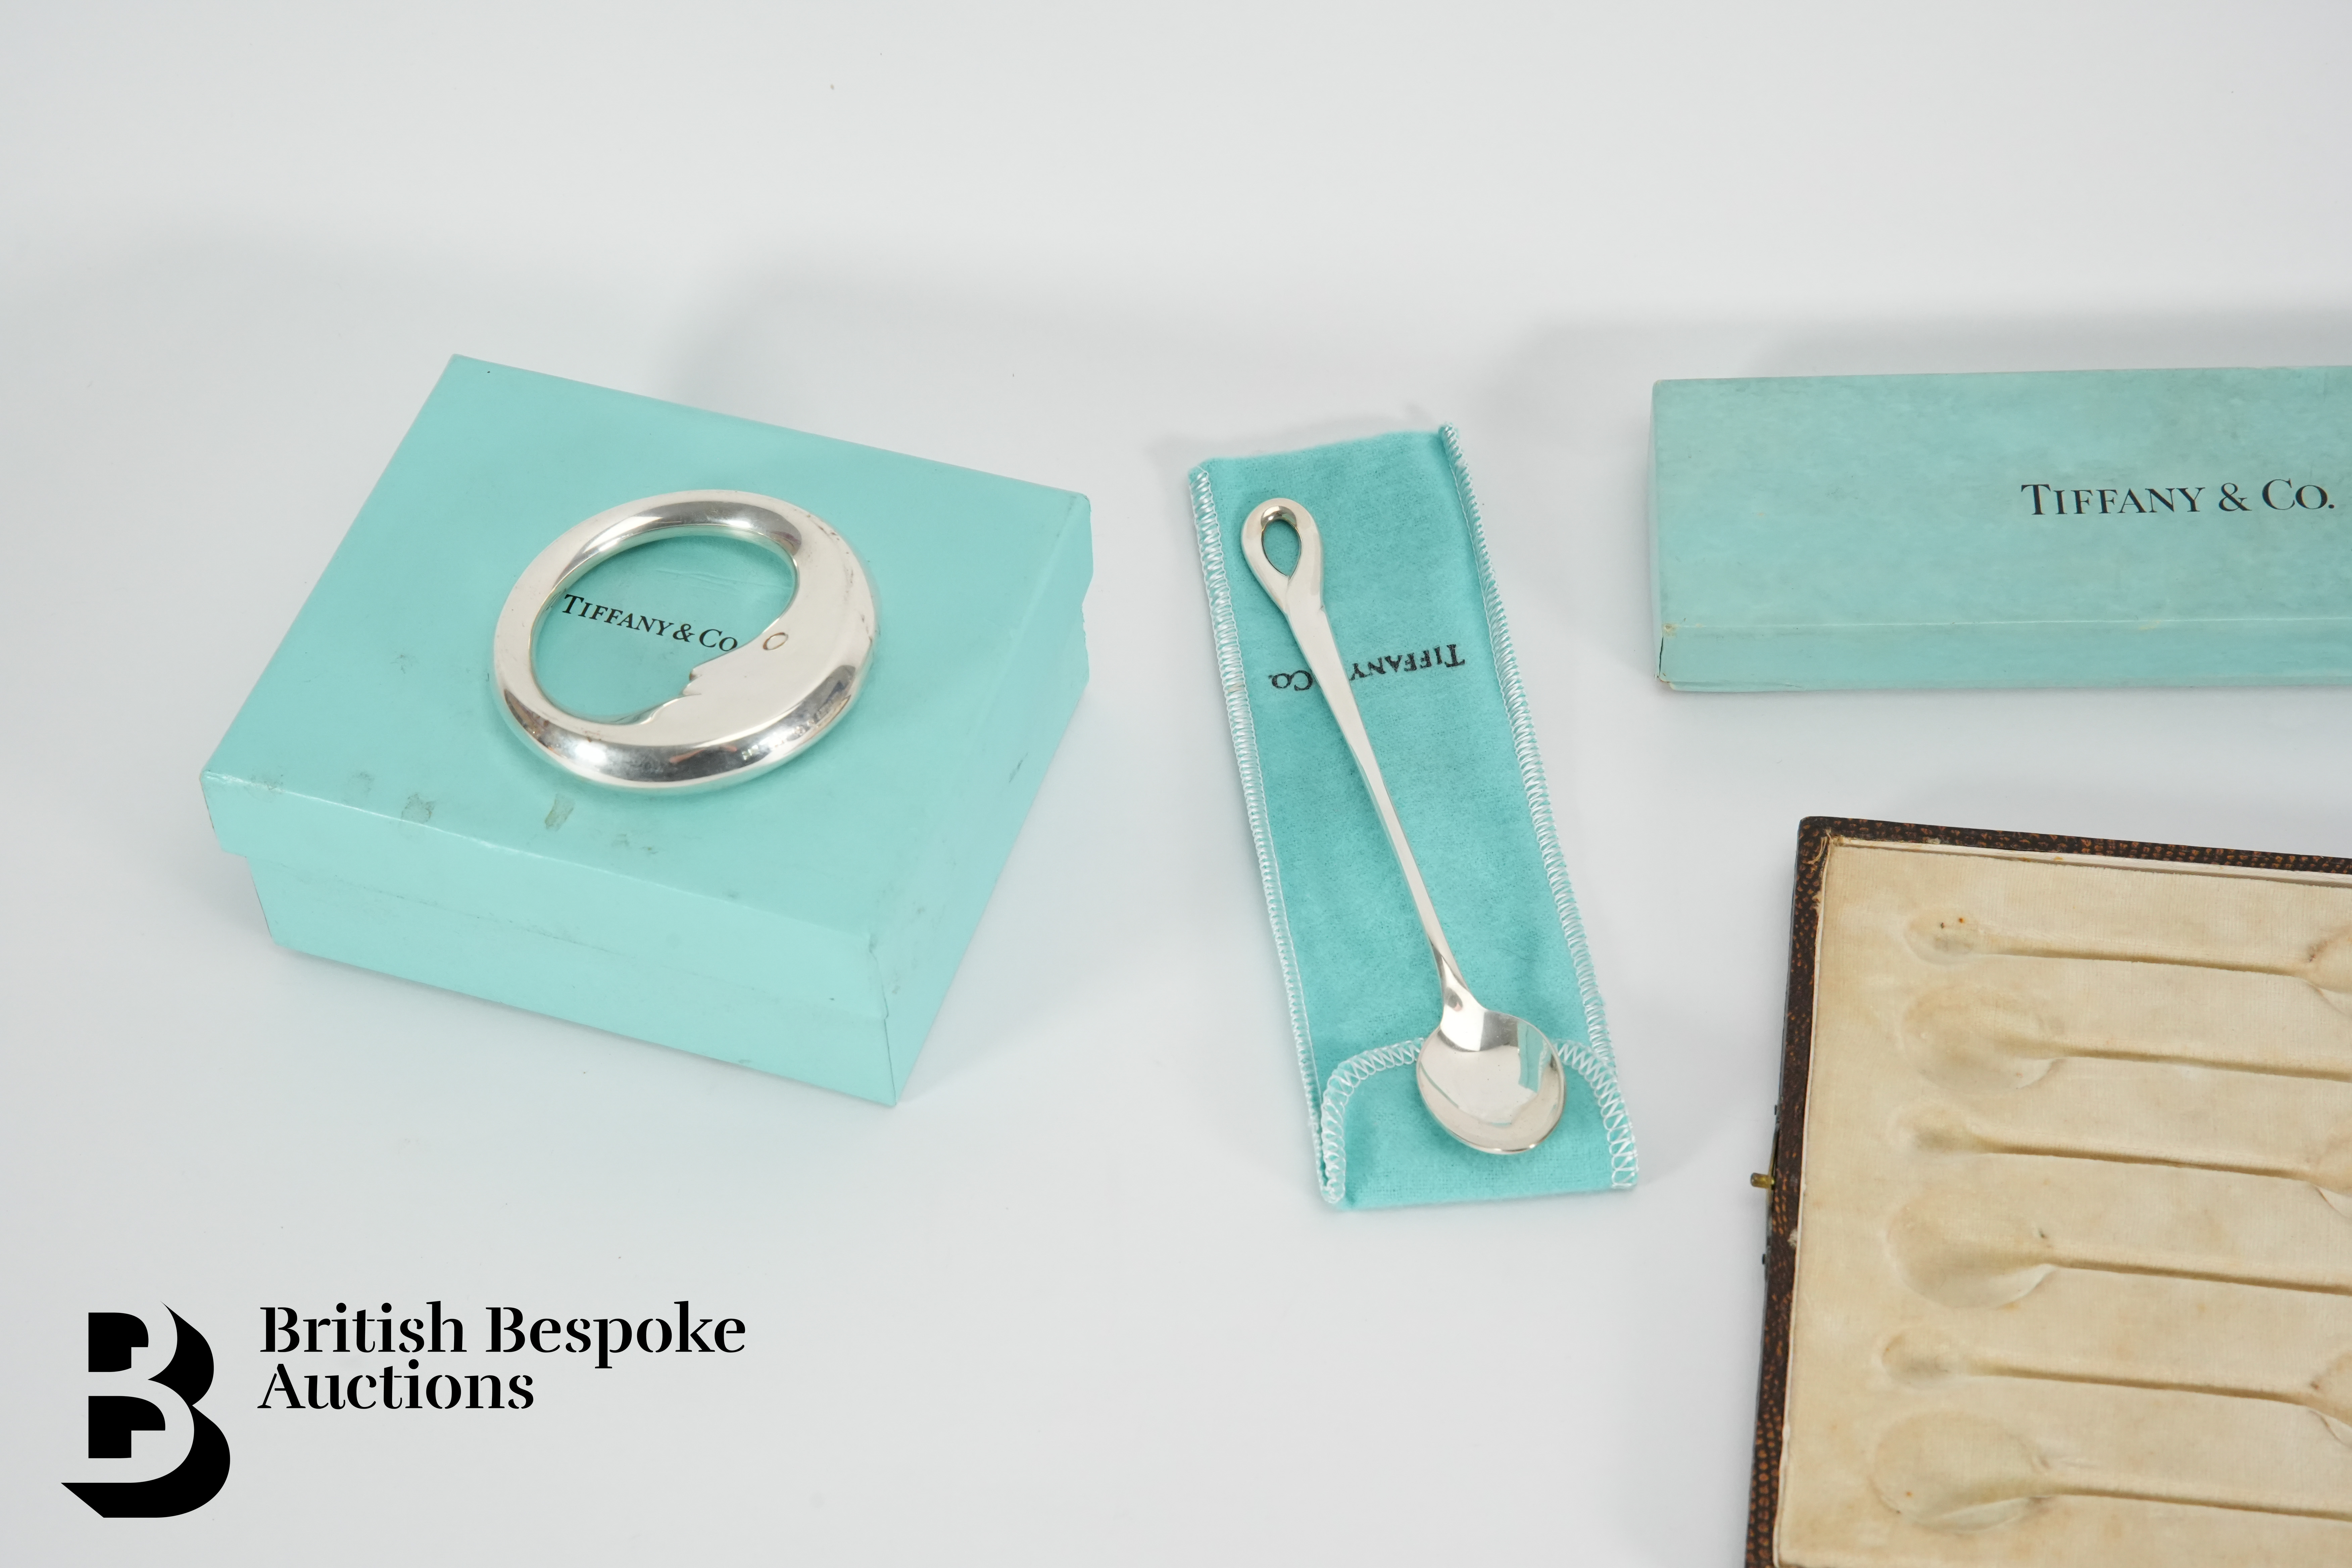 Tiffany & Co Silver Spoon and Baby Rattle - Image 2 of 4